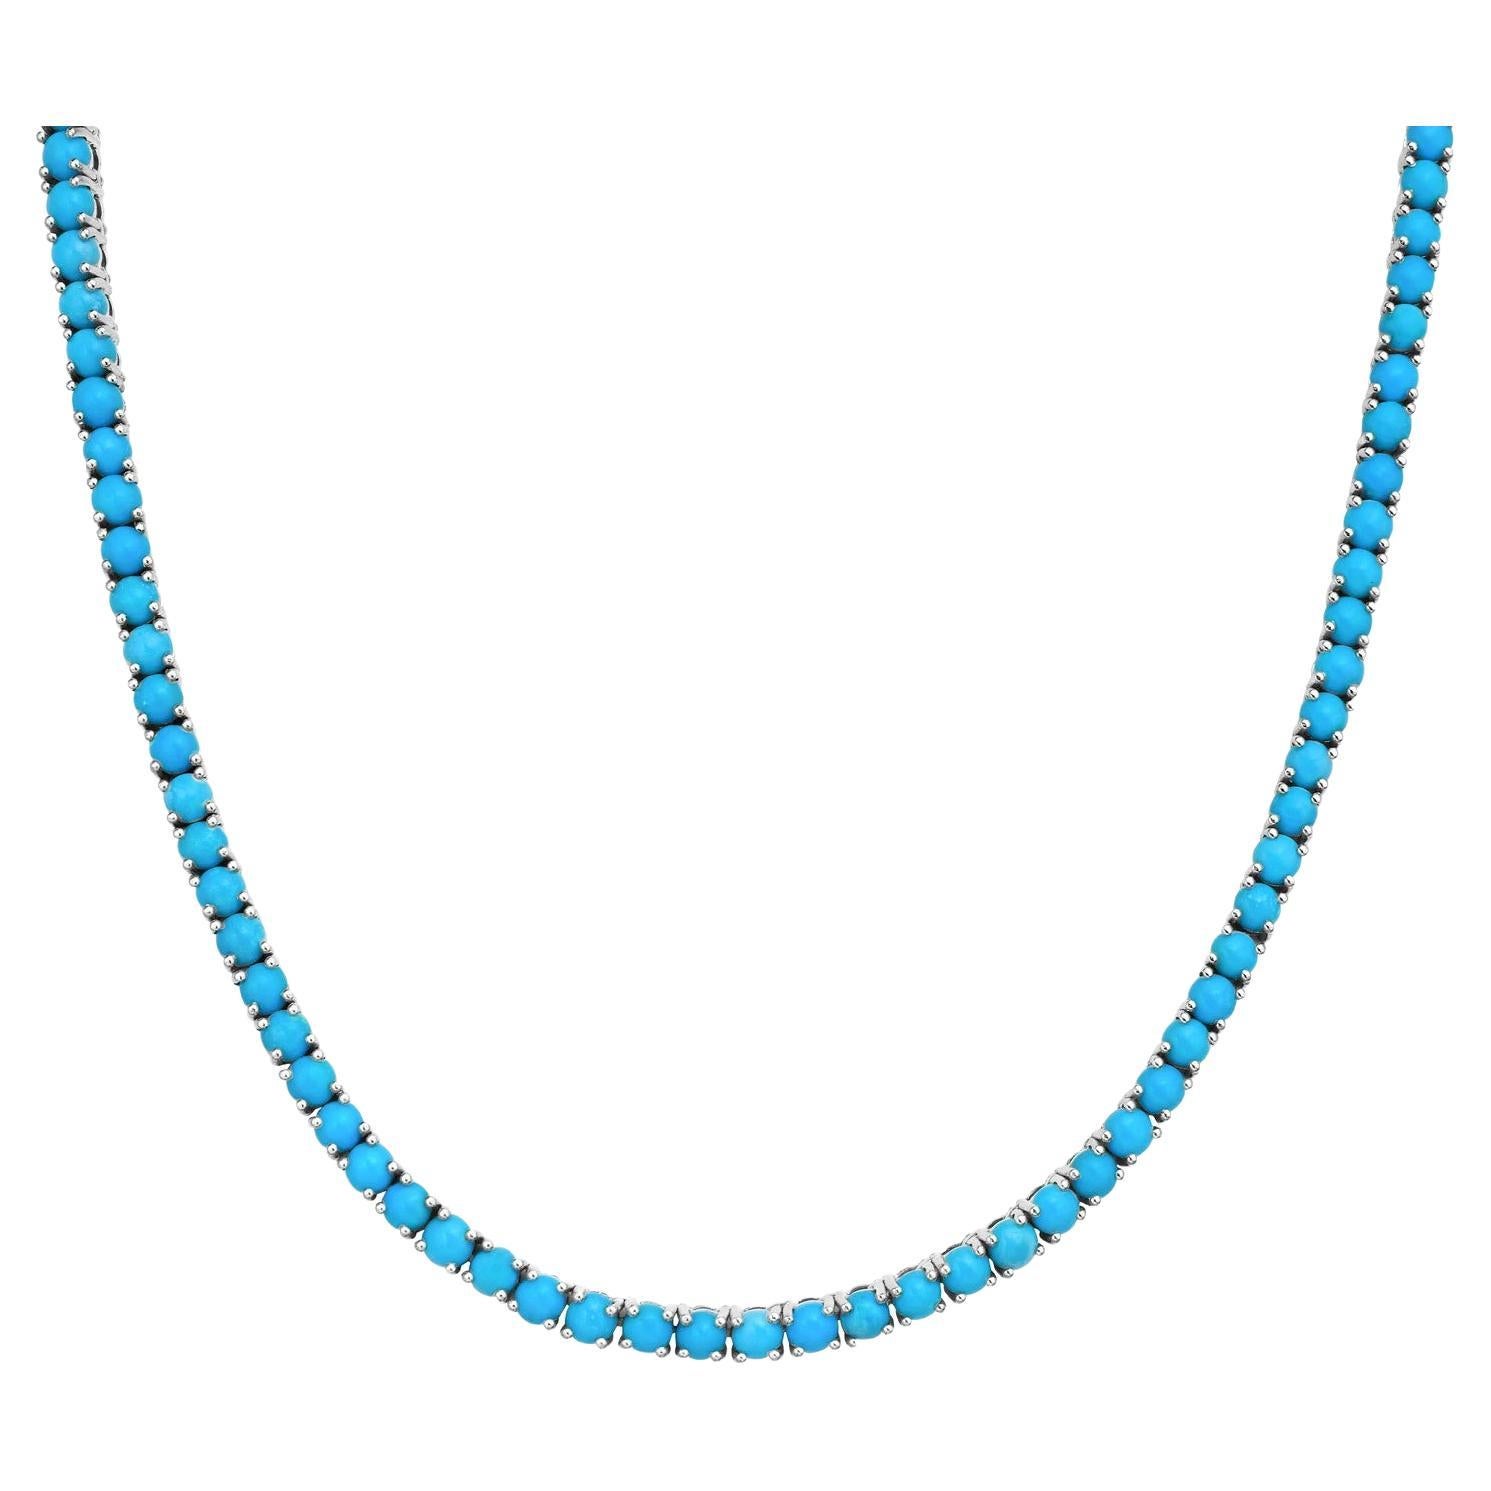 Turquoise Necklace 16.64 Carats 14K White Gold